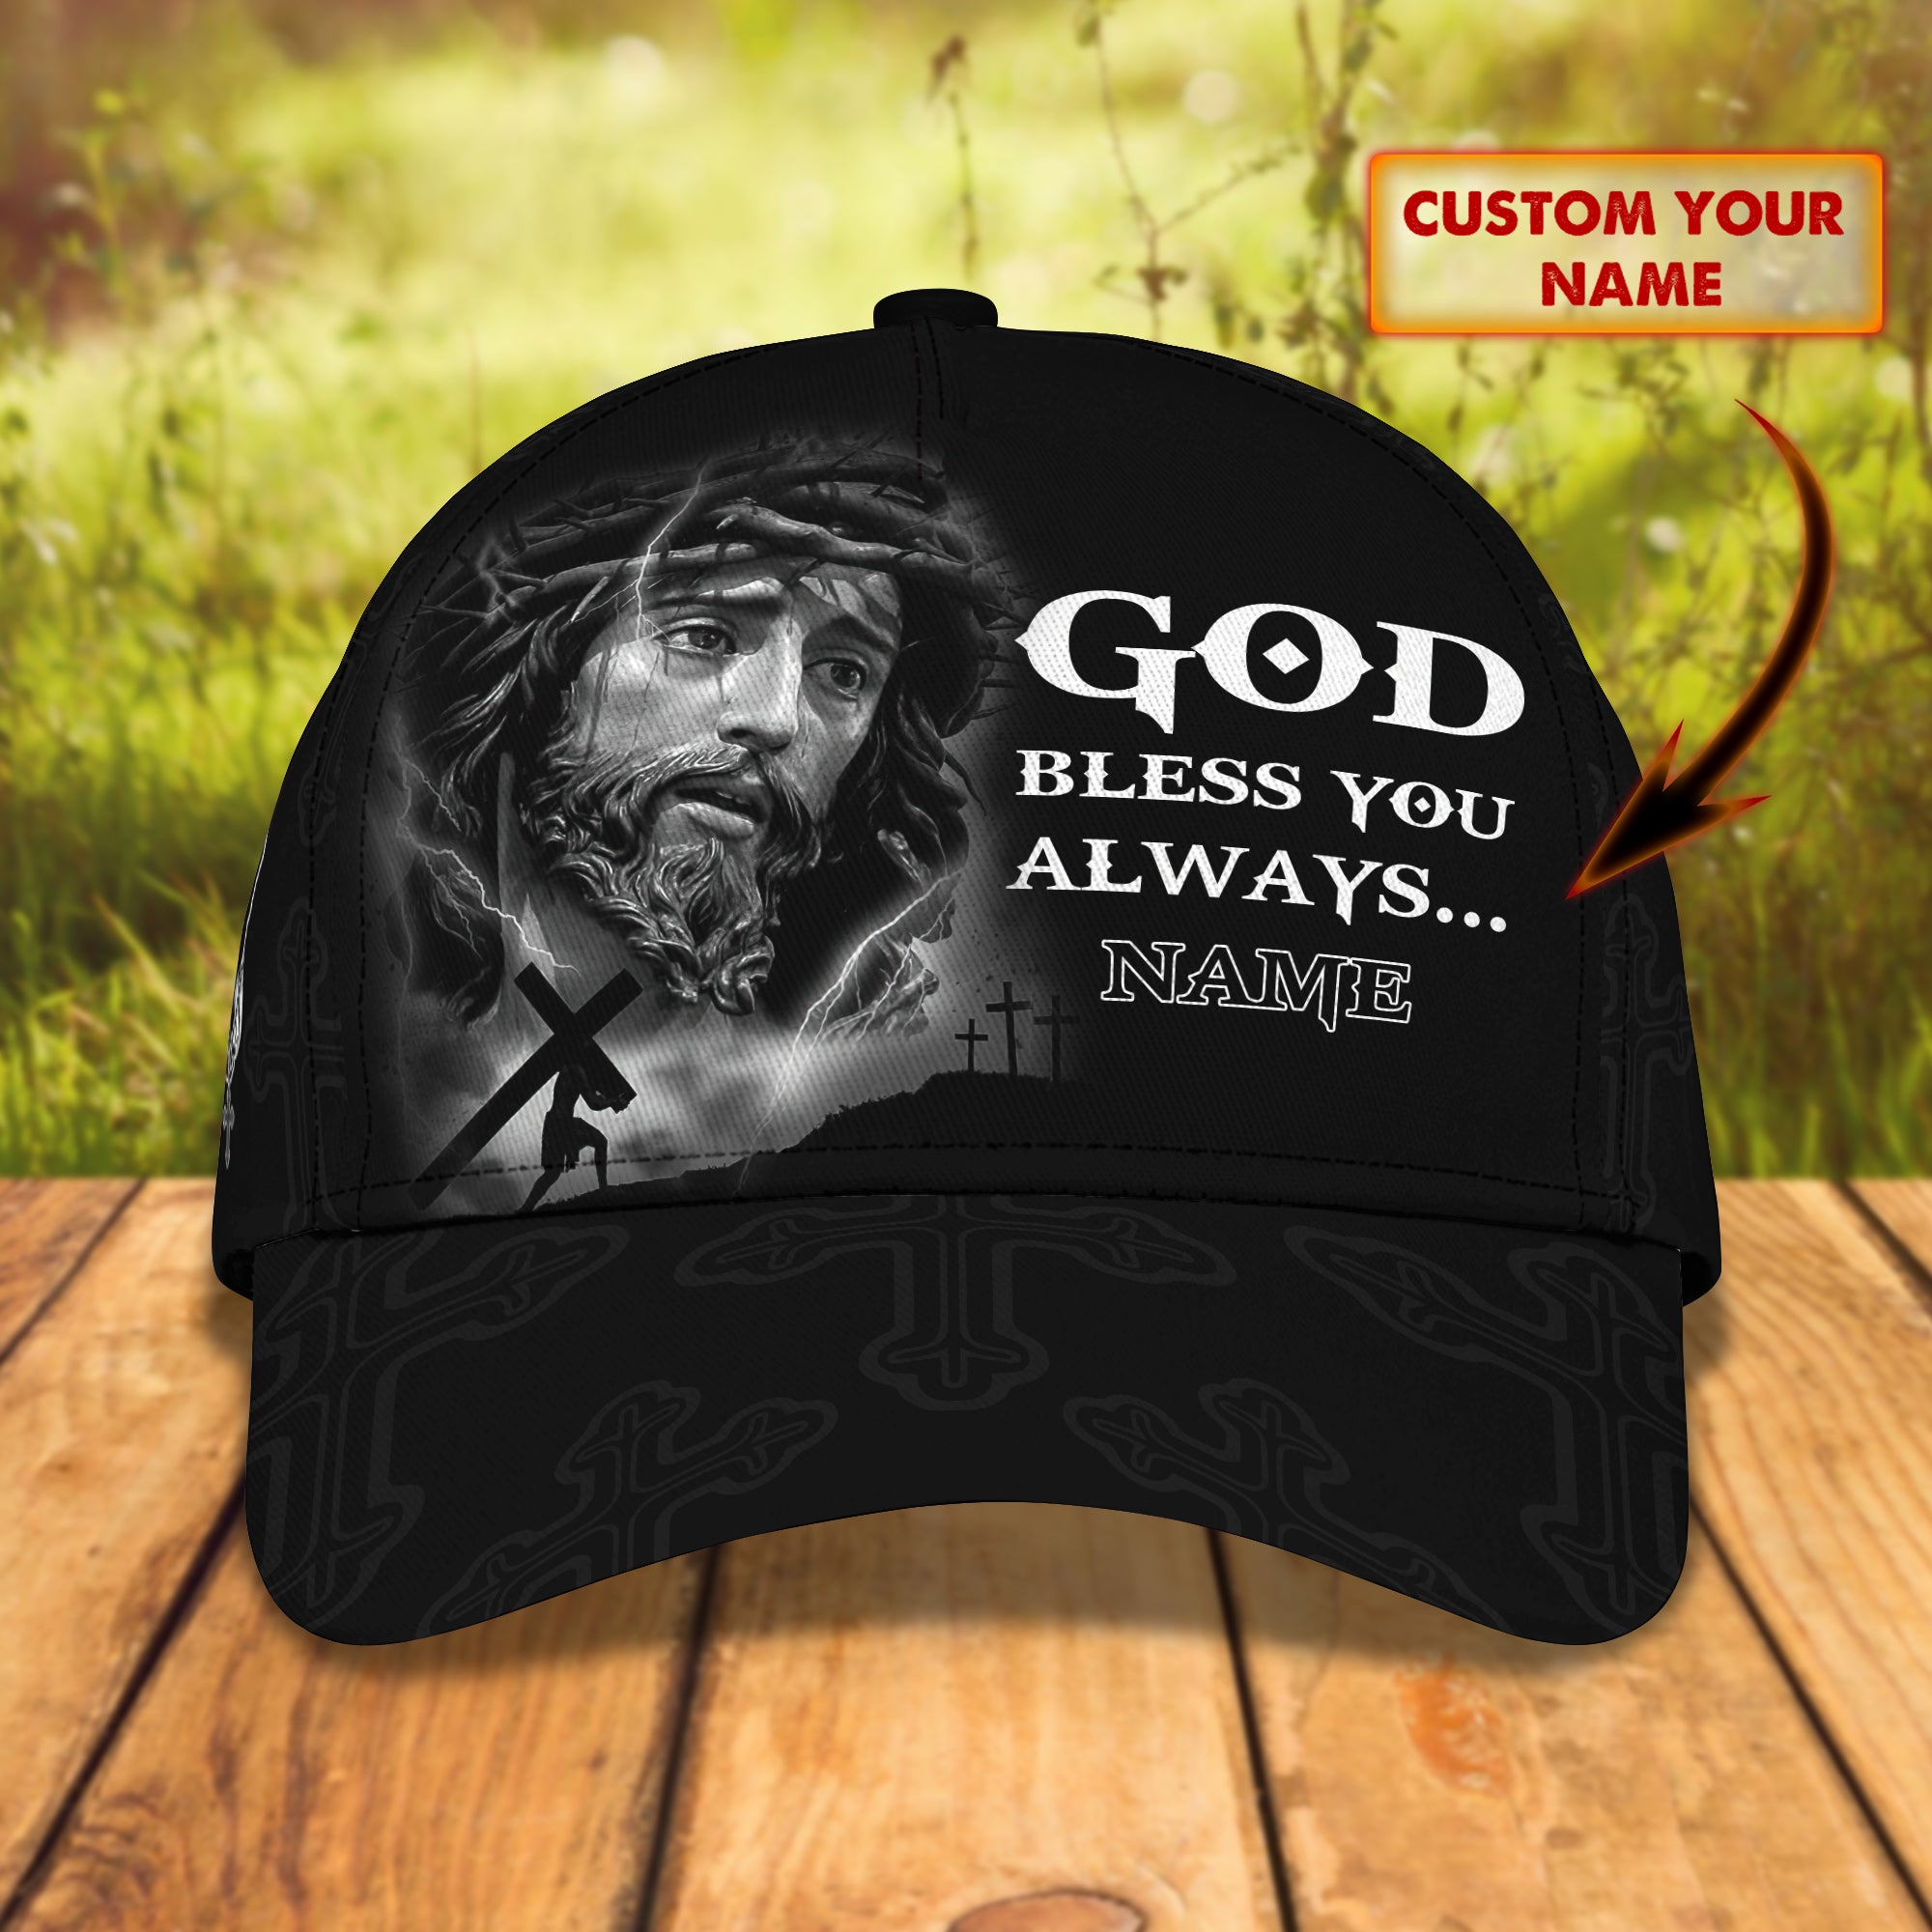 Jesus Vn96 - Personalized Cap 013